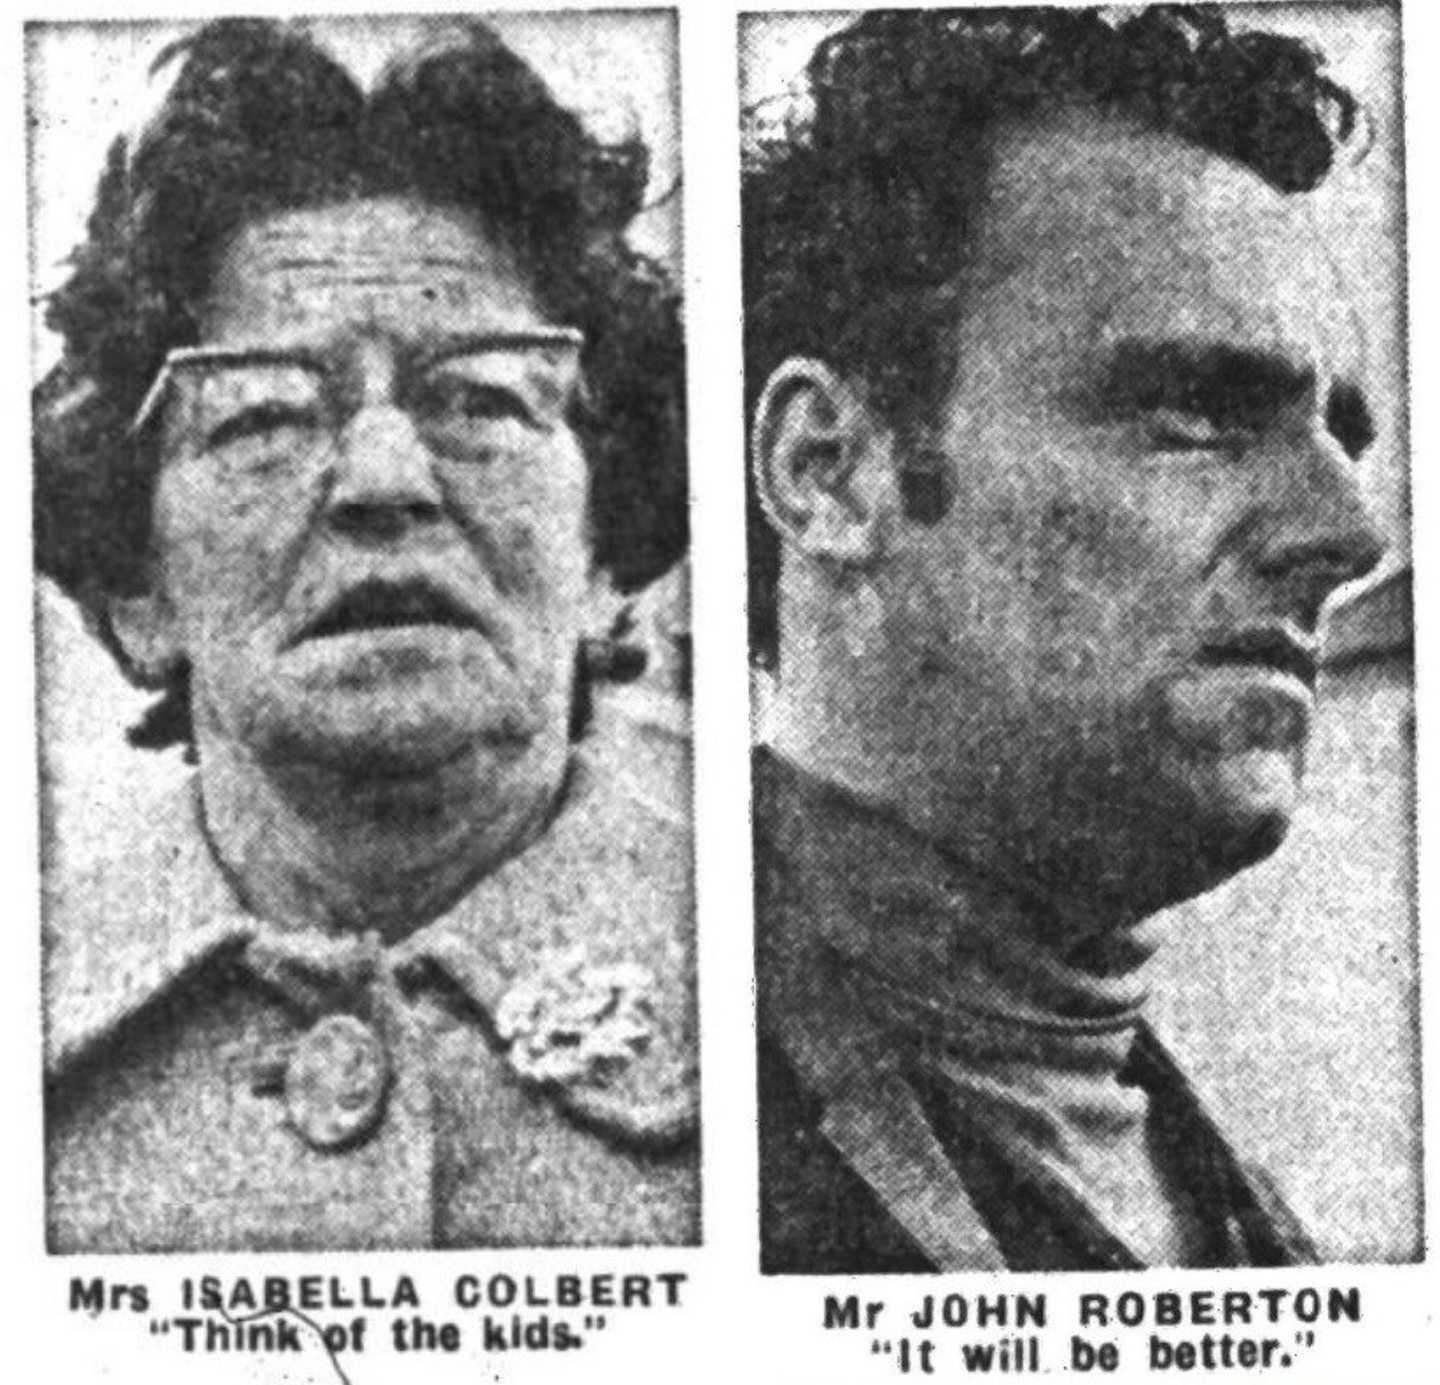 Isabella Colbert and John Robertson, Kilgour residents in 1969 featured in the newspaper